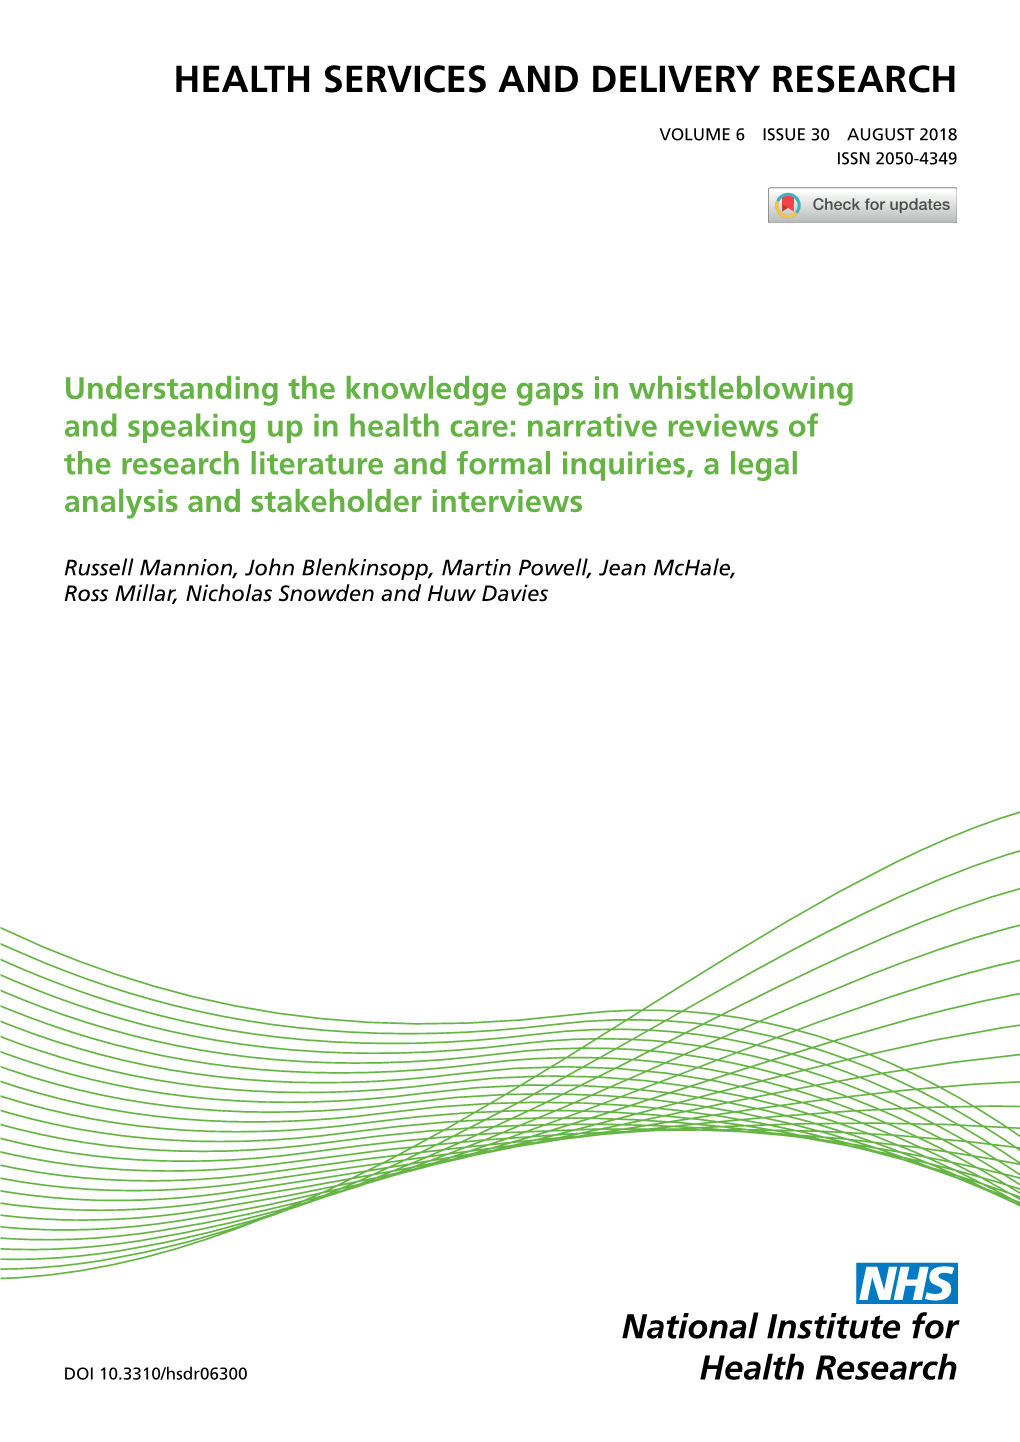 Understanding the Knowledge Gaps in Whistleblowing and Speaking up In